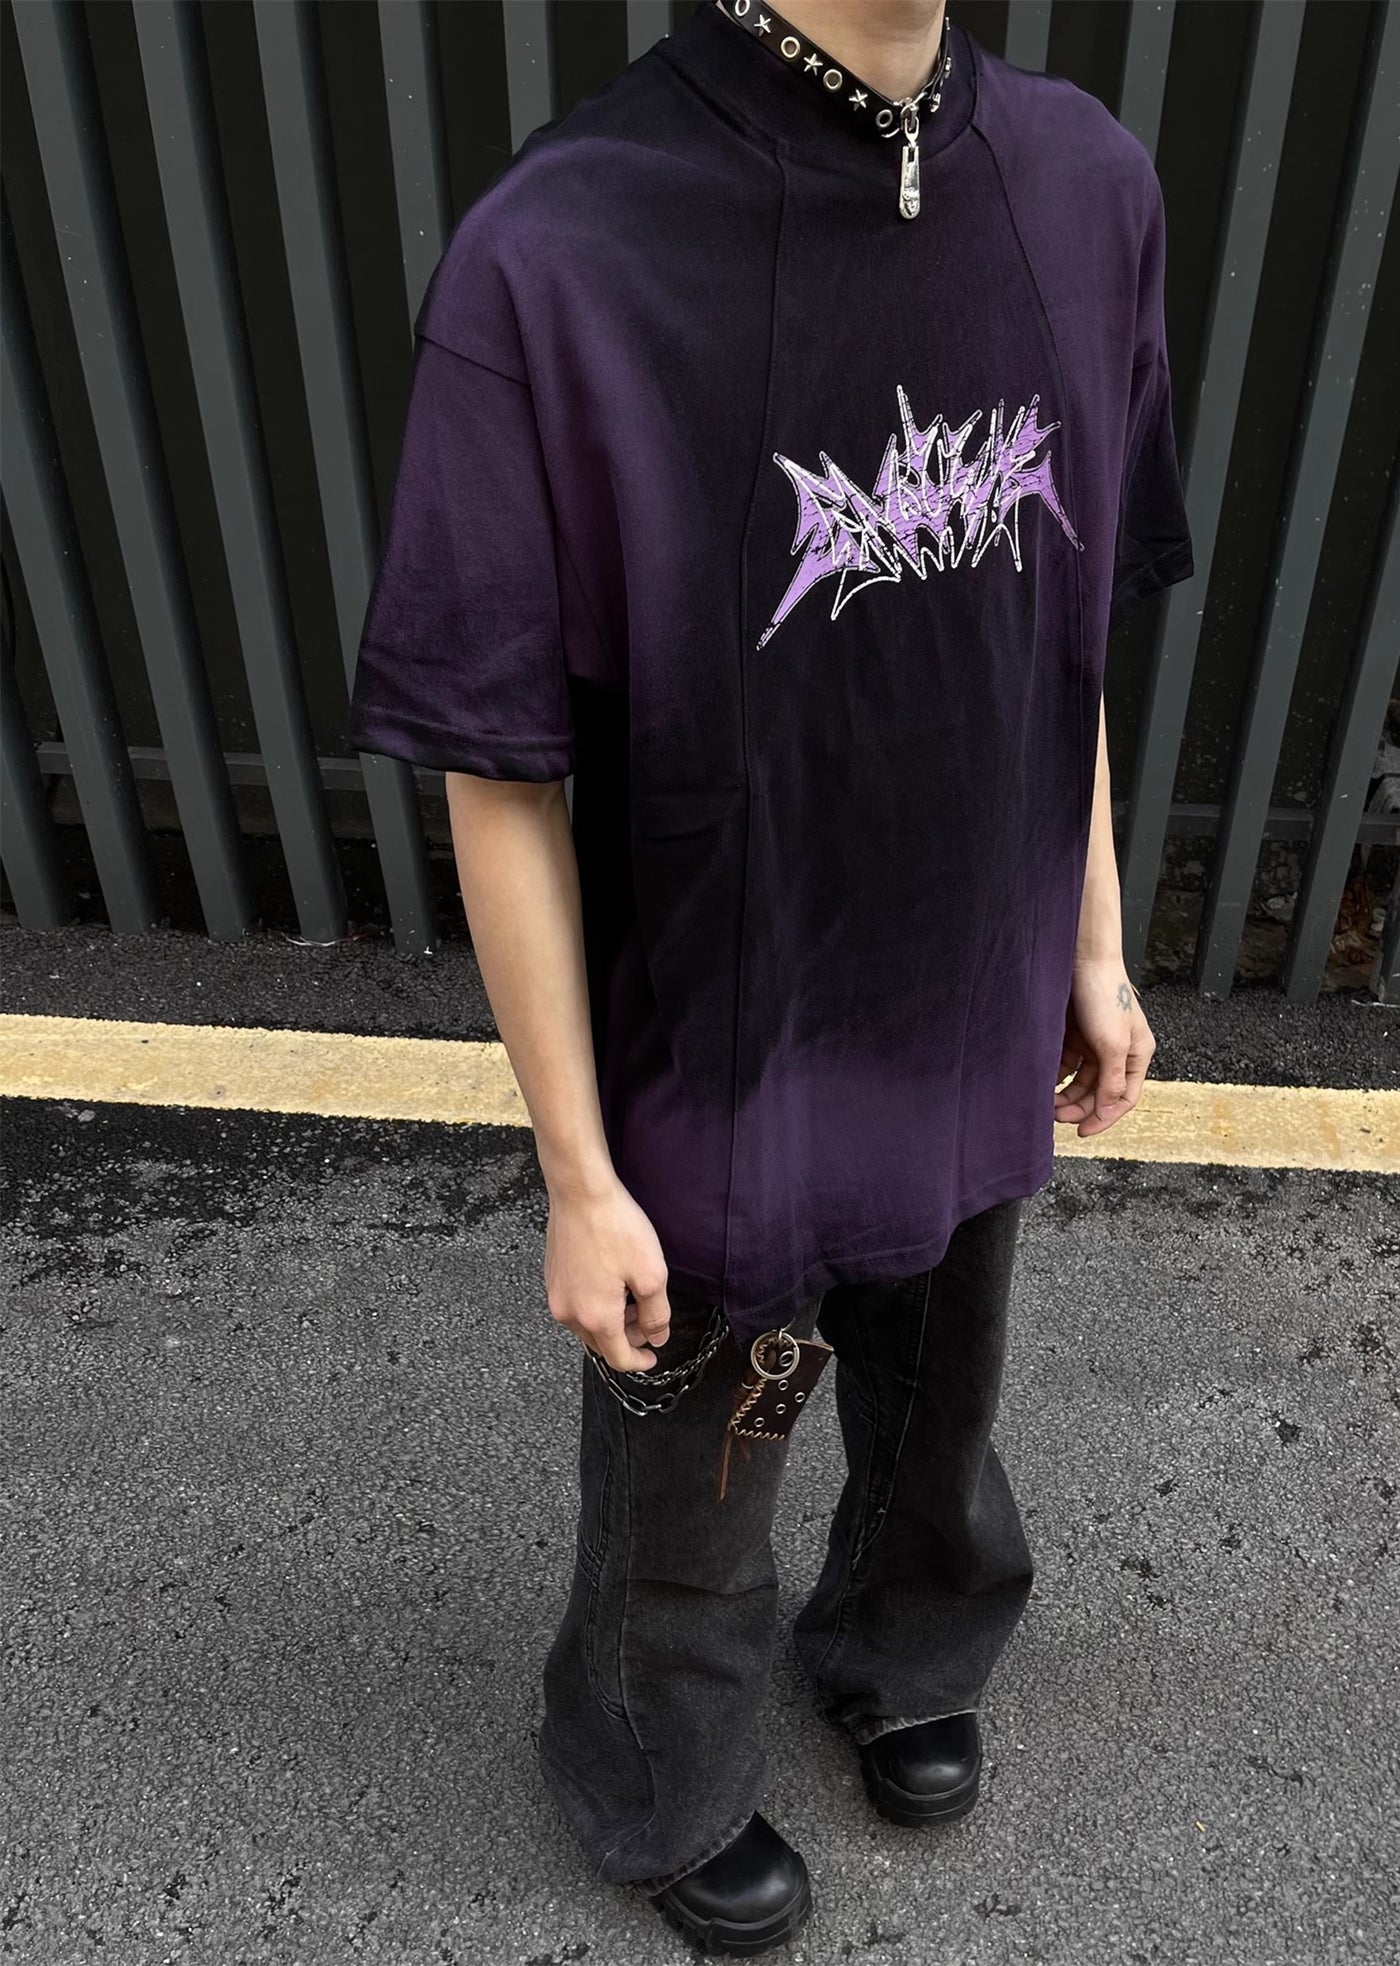 【MAXDSTR】Dull washed dark colored subculture short sleeve T-shirt  MD0134